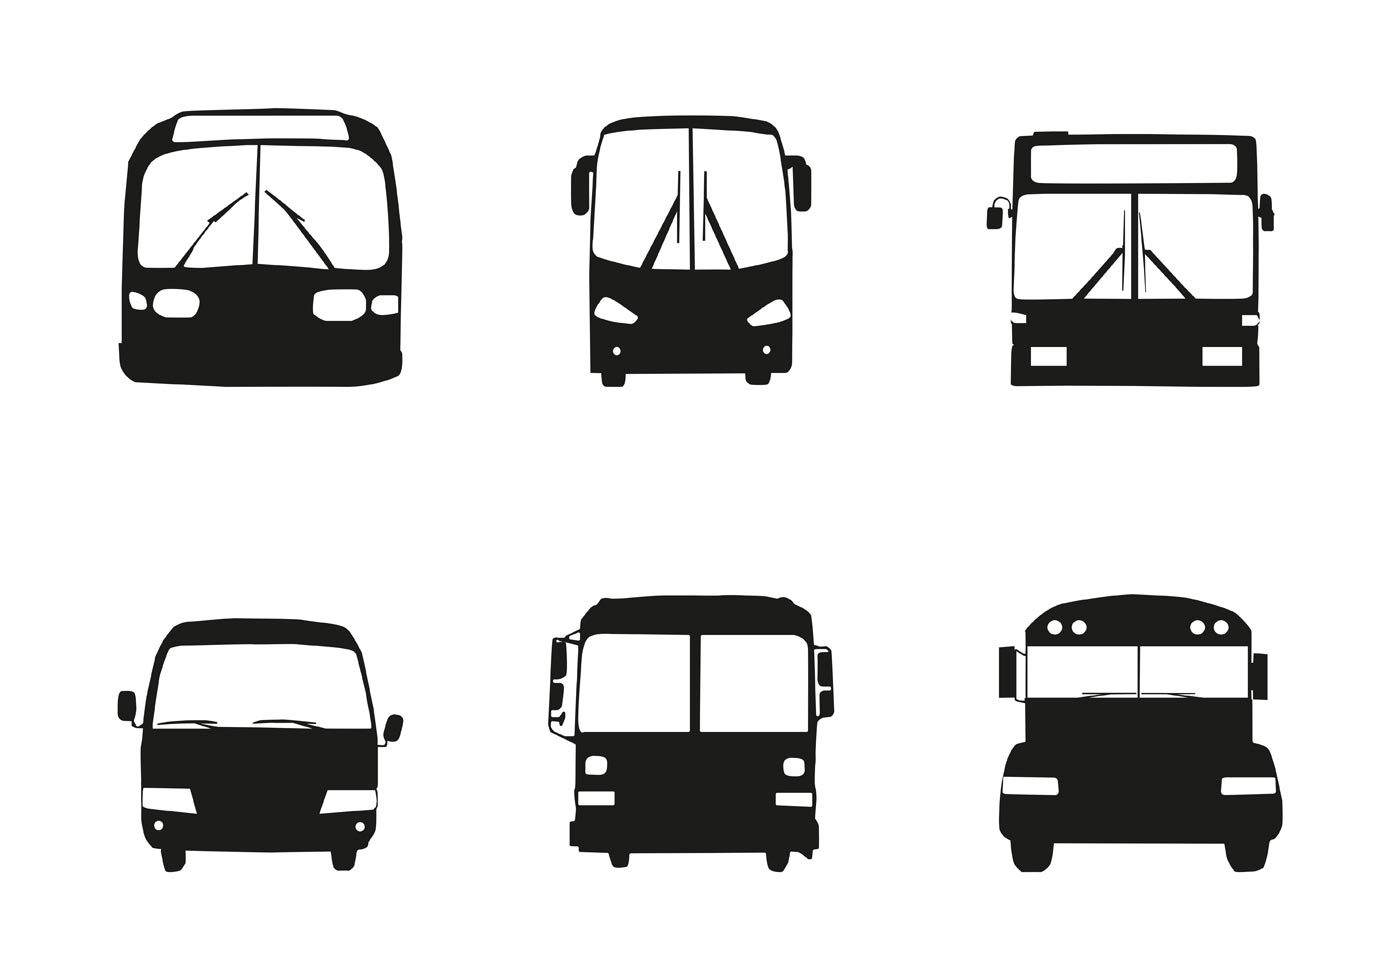 front of bus clipart - photo #35